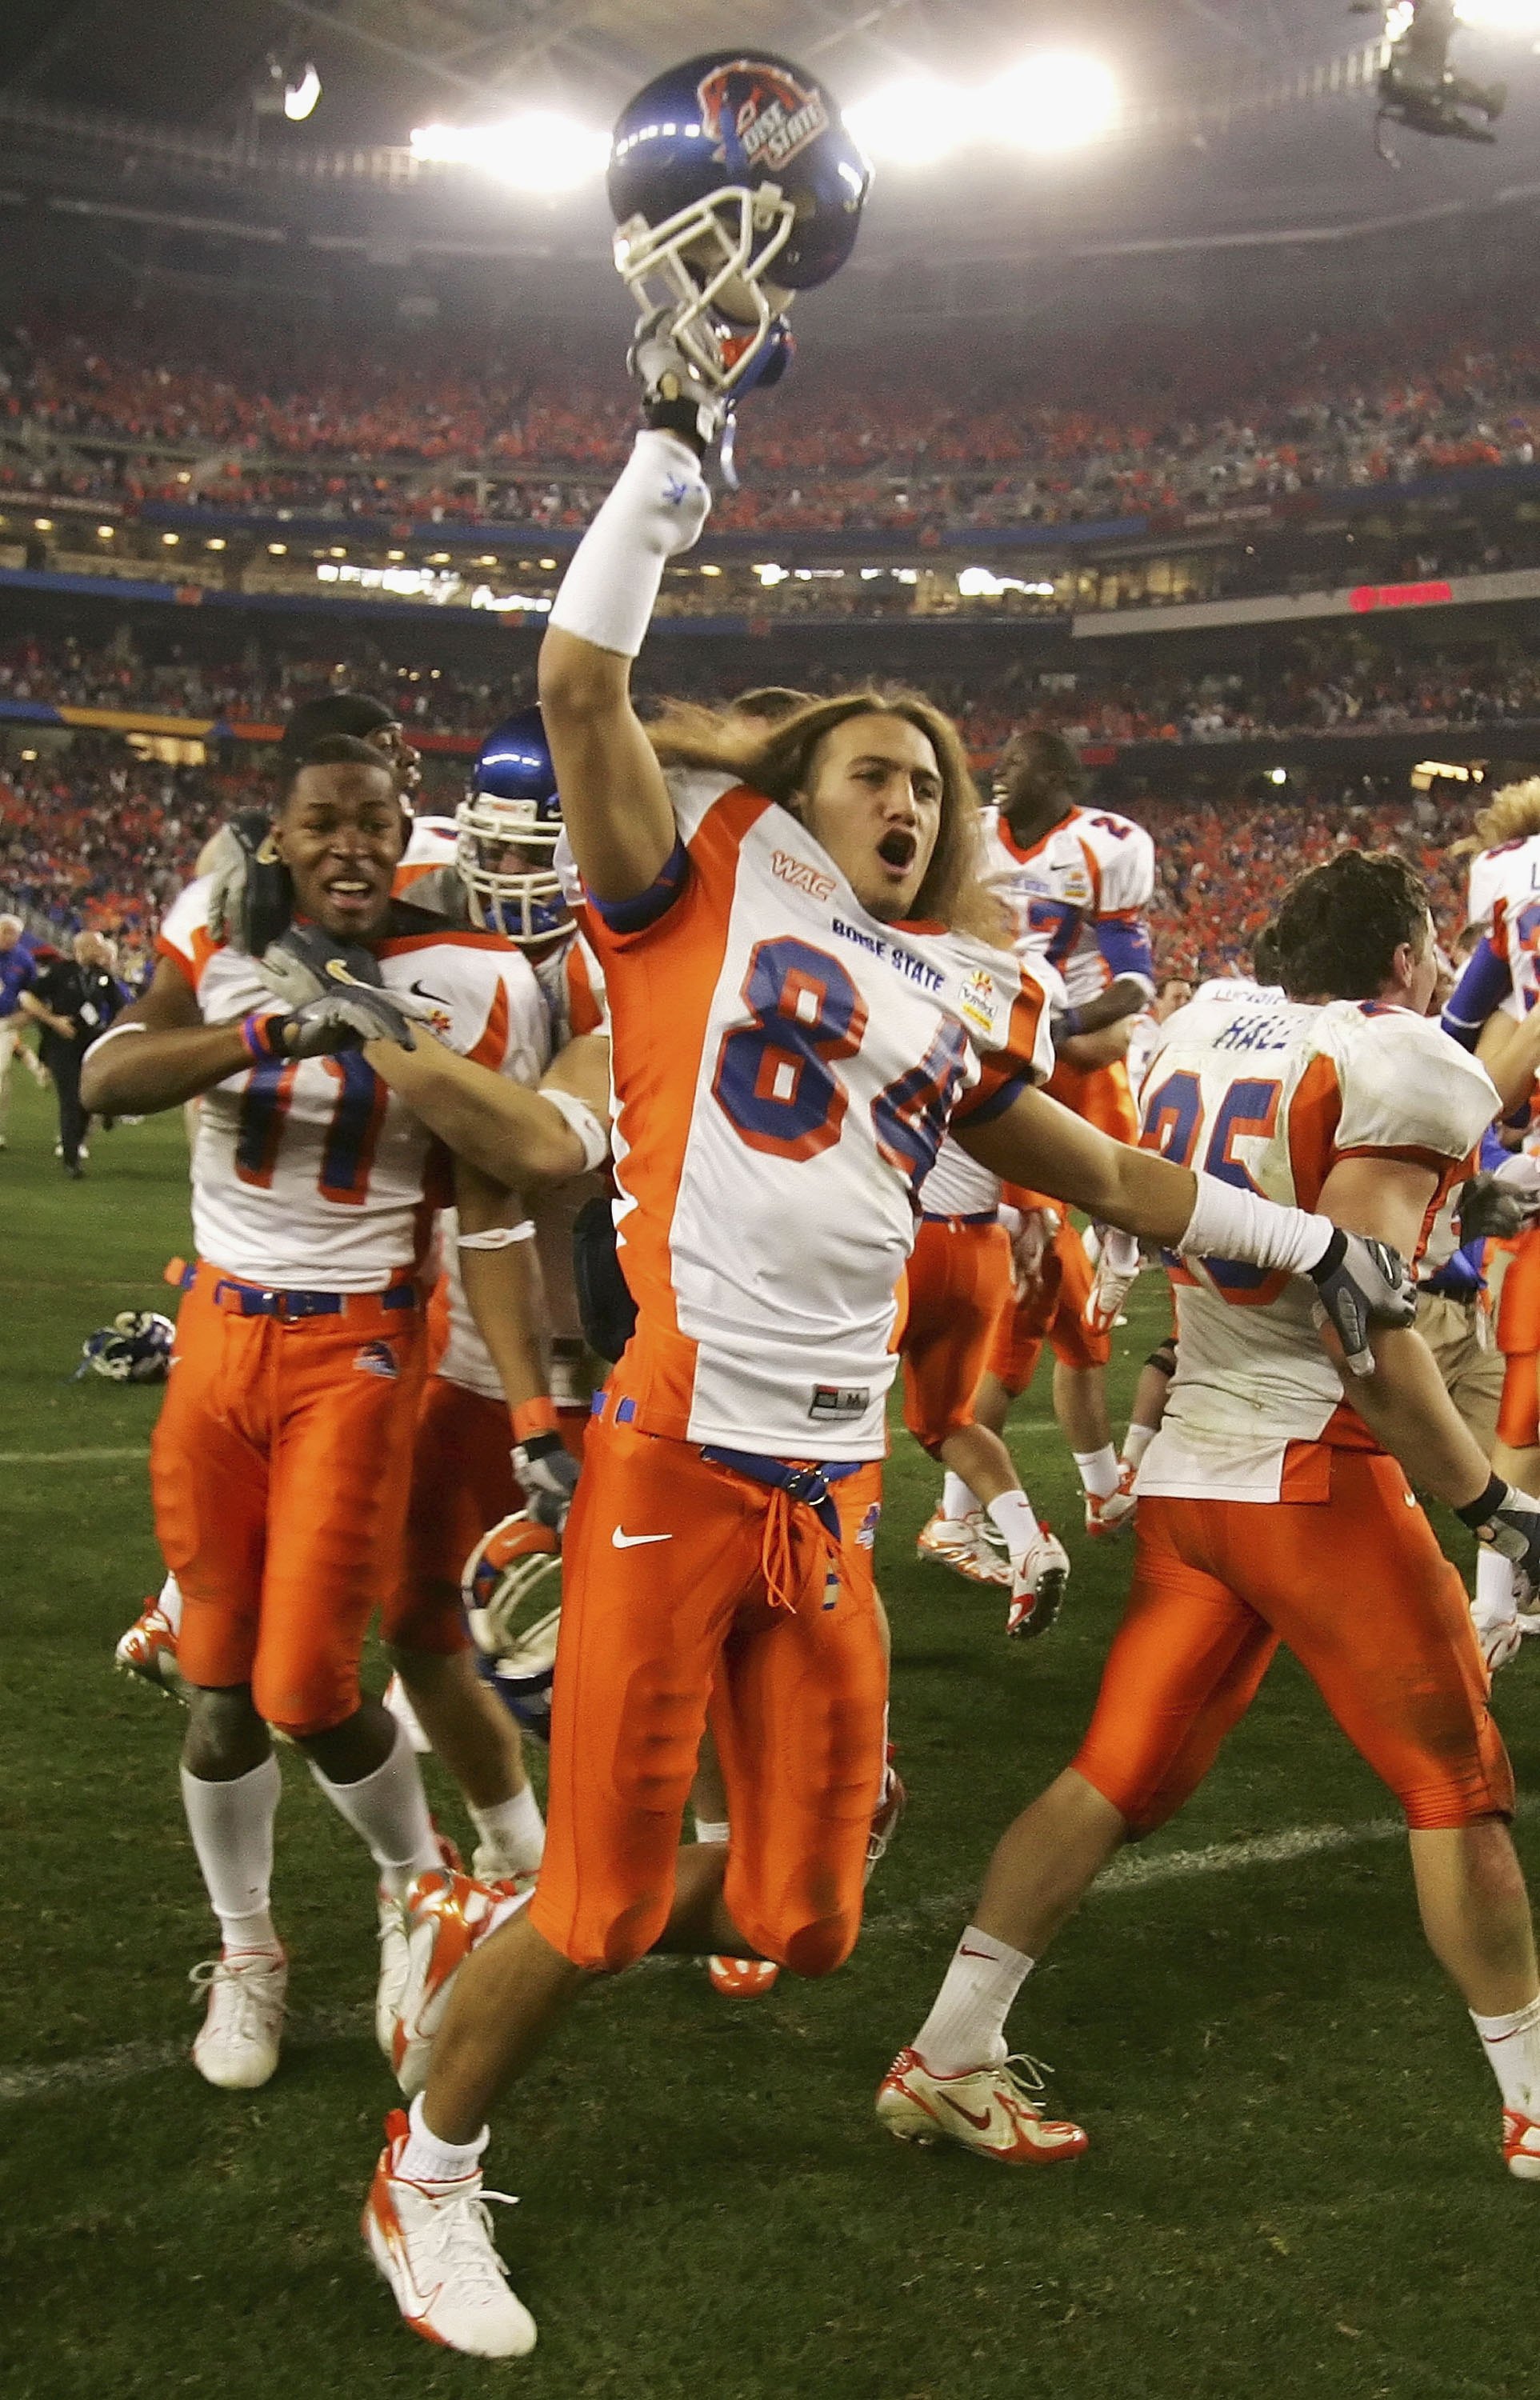 GLENDALE, AZ - JANUARY 01:  Aiona Key #84 of the Boise State Broncos celebates after defeating the Oklahoma Sooners 43-42 at the Tostito's Fiesta Bowl at University of Phoenix Stadium on January 1, 2007 in Glendale, Arizona.  (Photo by Jonathan Ferrey/Get